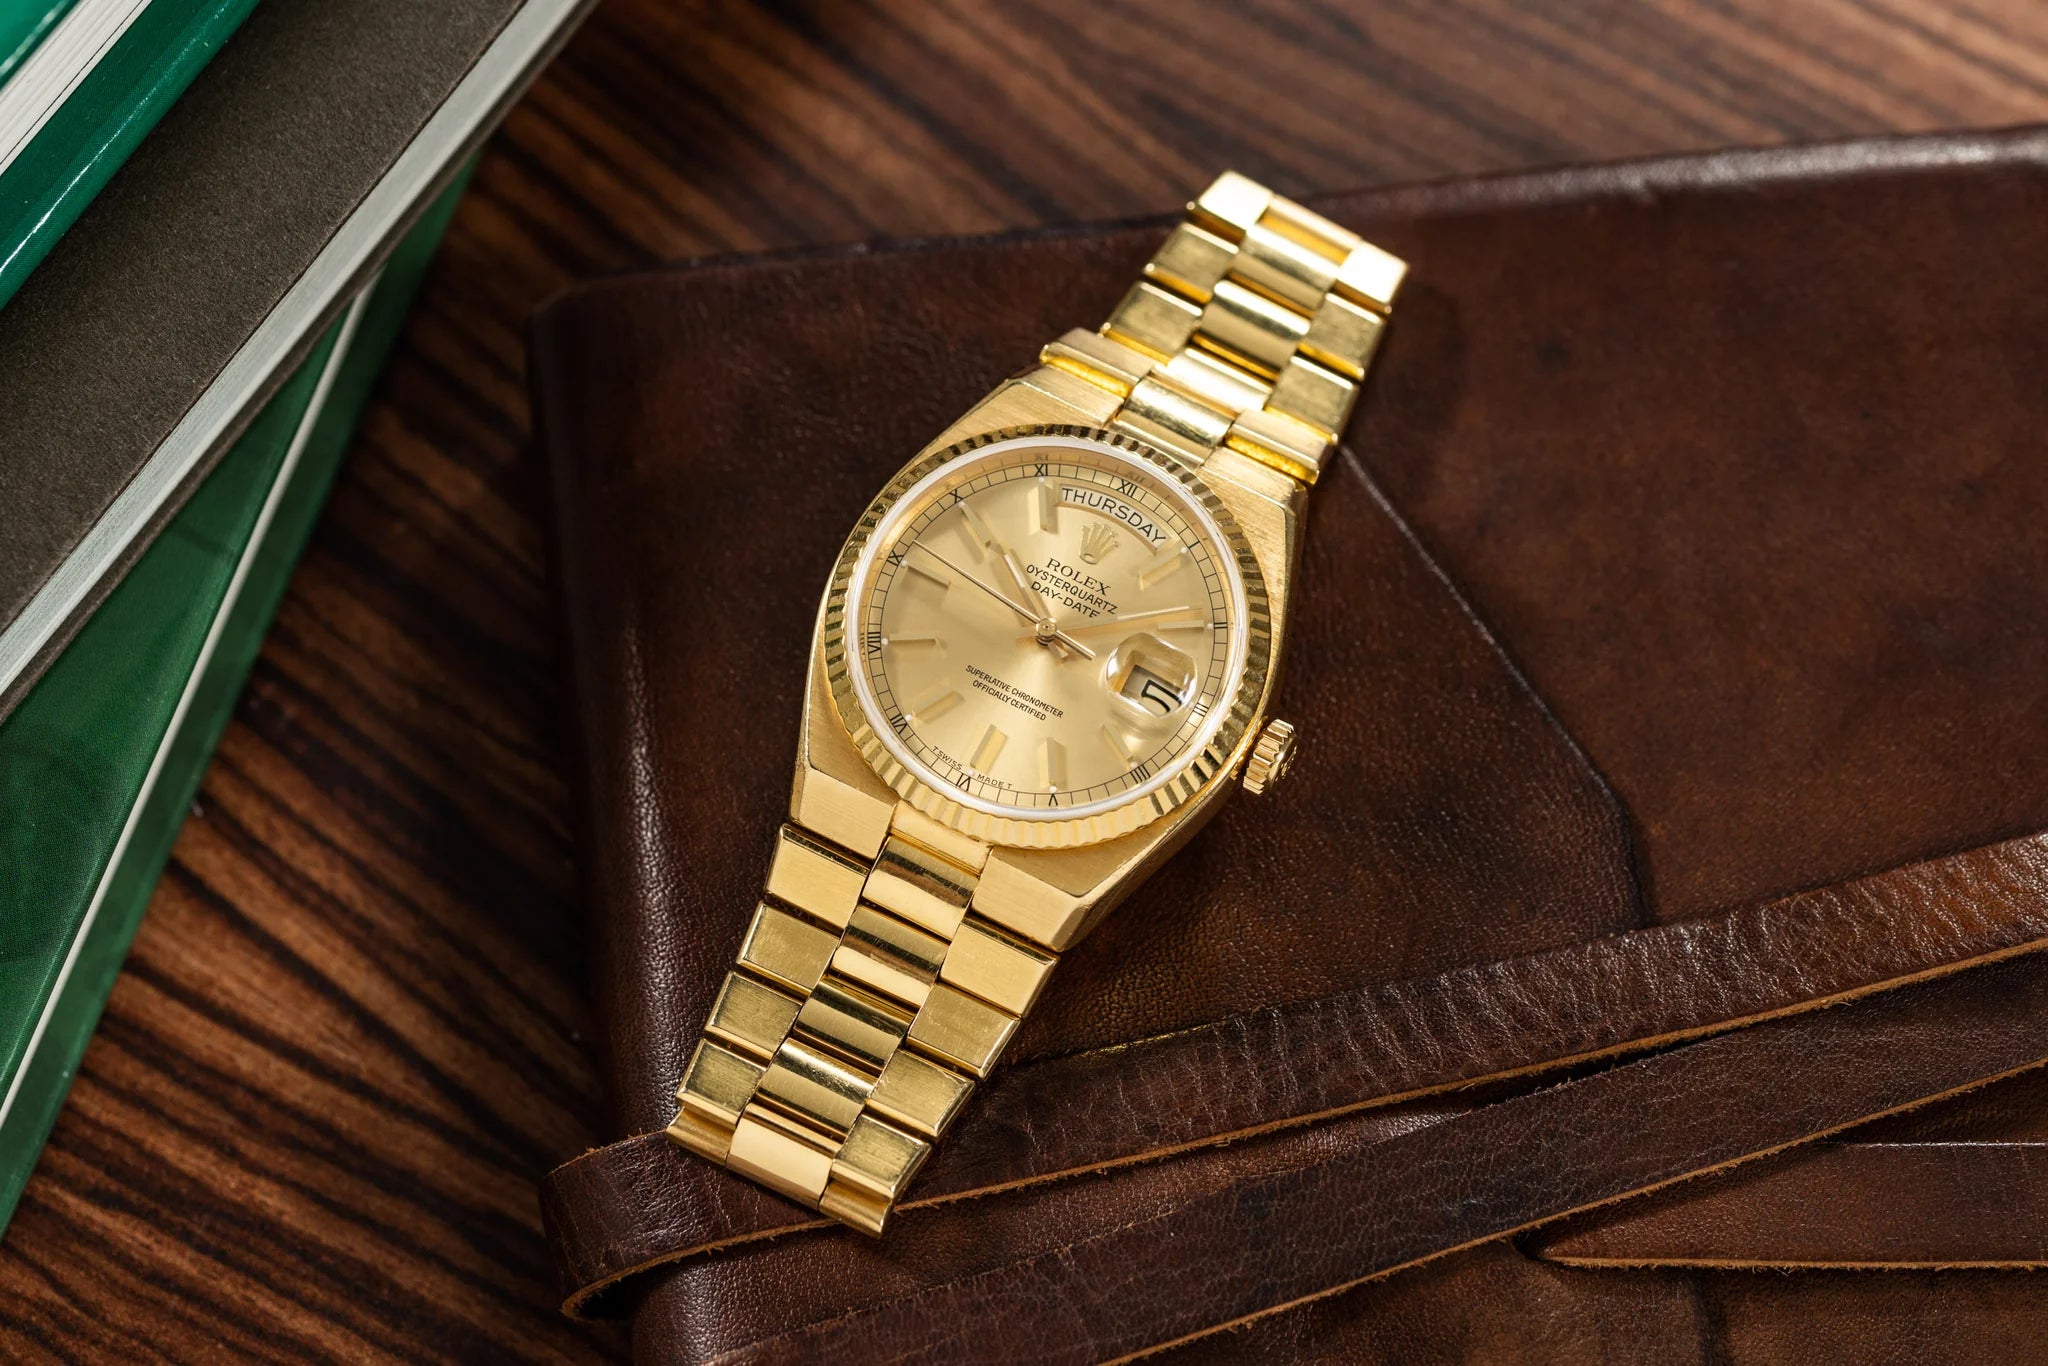 Official Rolex Retailer in Singapore | The Hour Glass